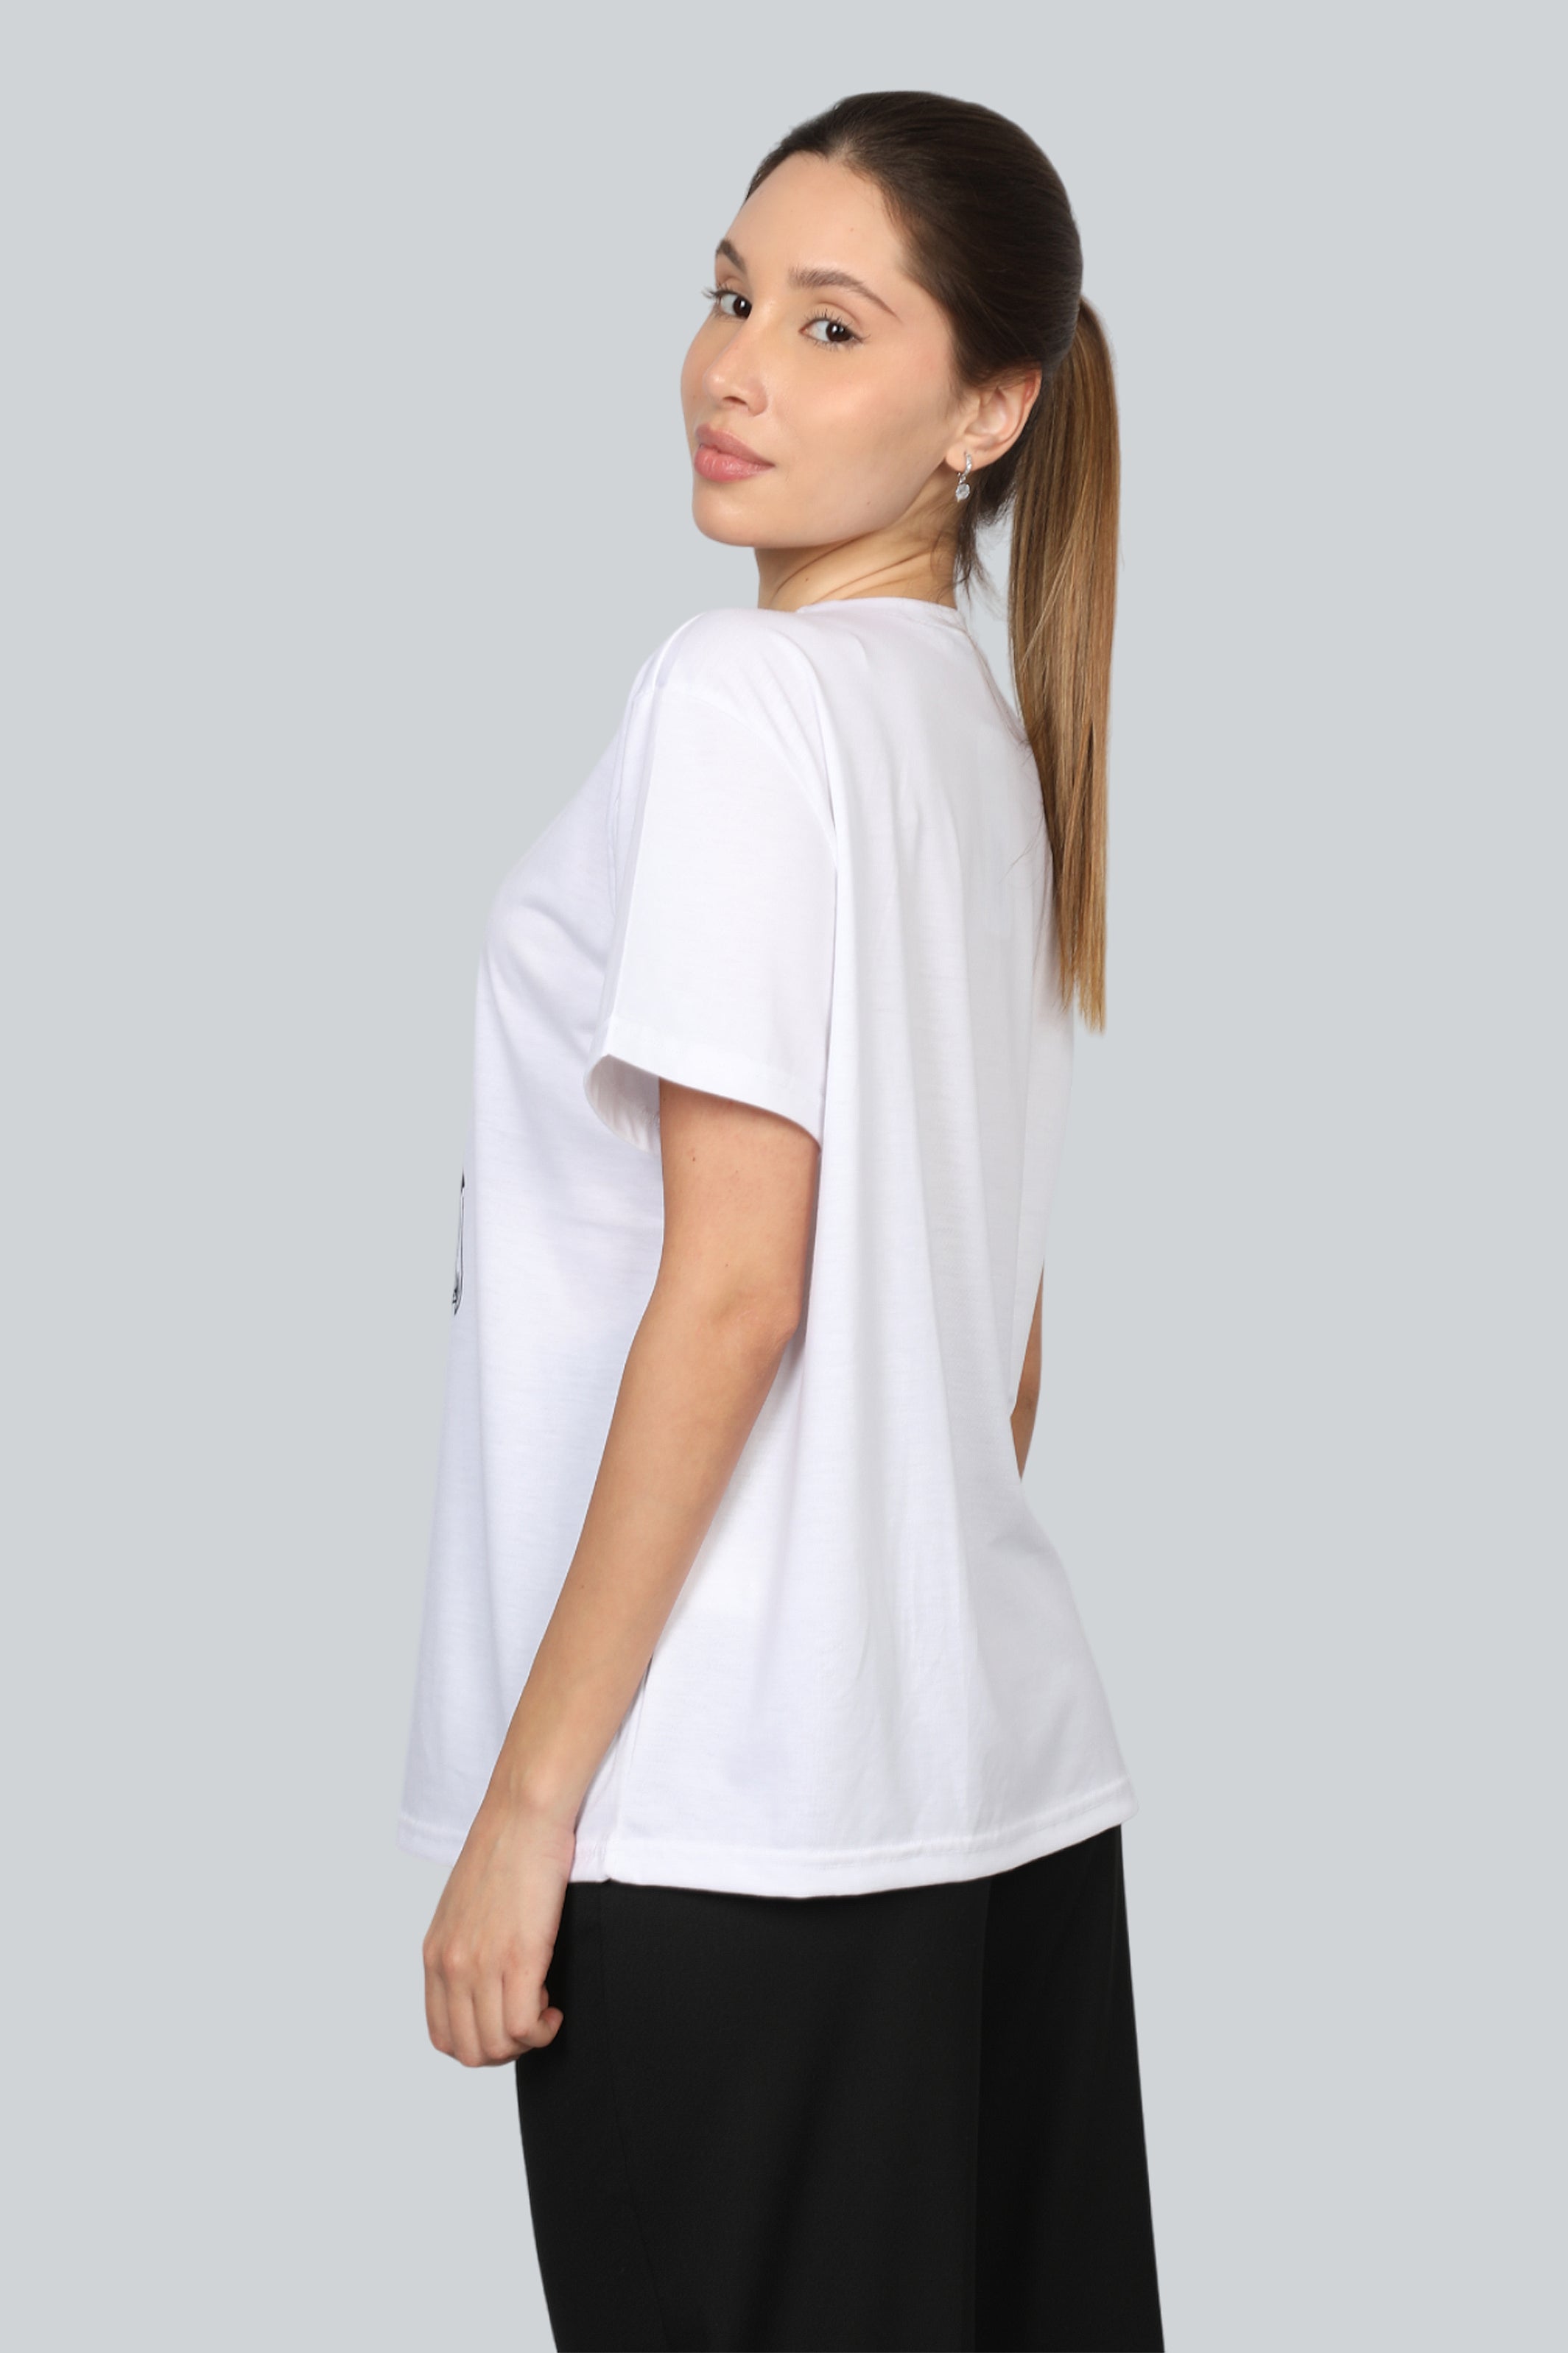 White Women T-shirt With Girls Front Design